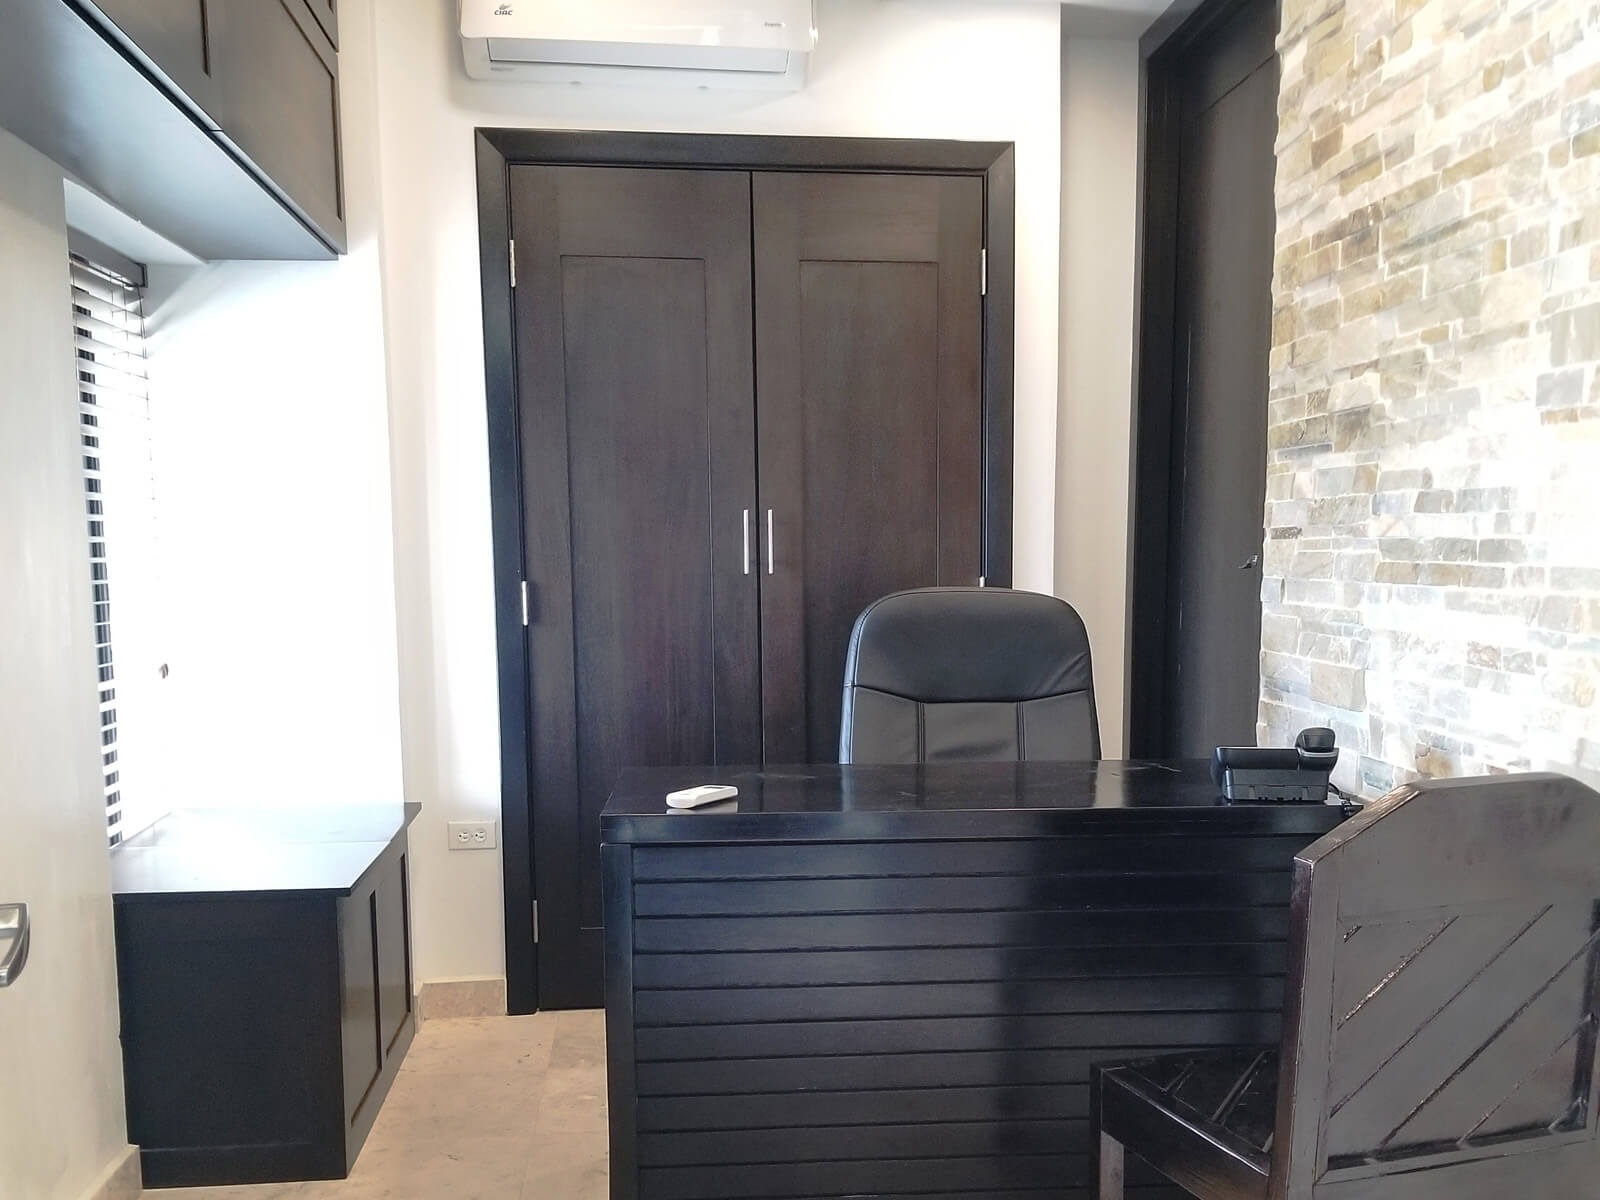 Office Space for Rent in Belize City